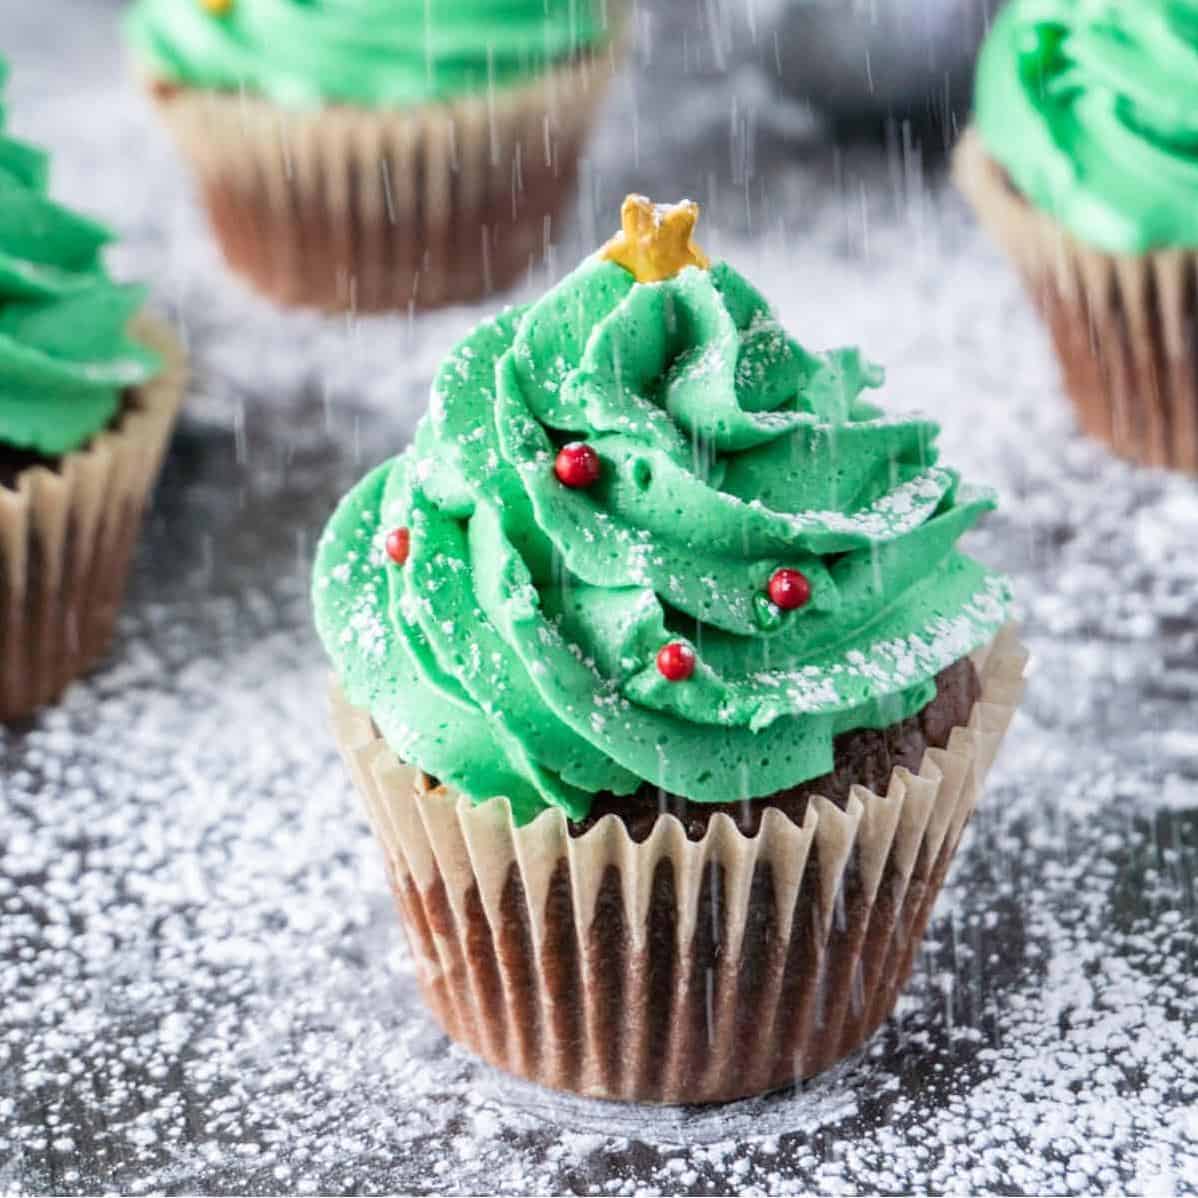  Create your own winter wonderland with these cute and festive cupcakes.